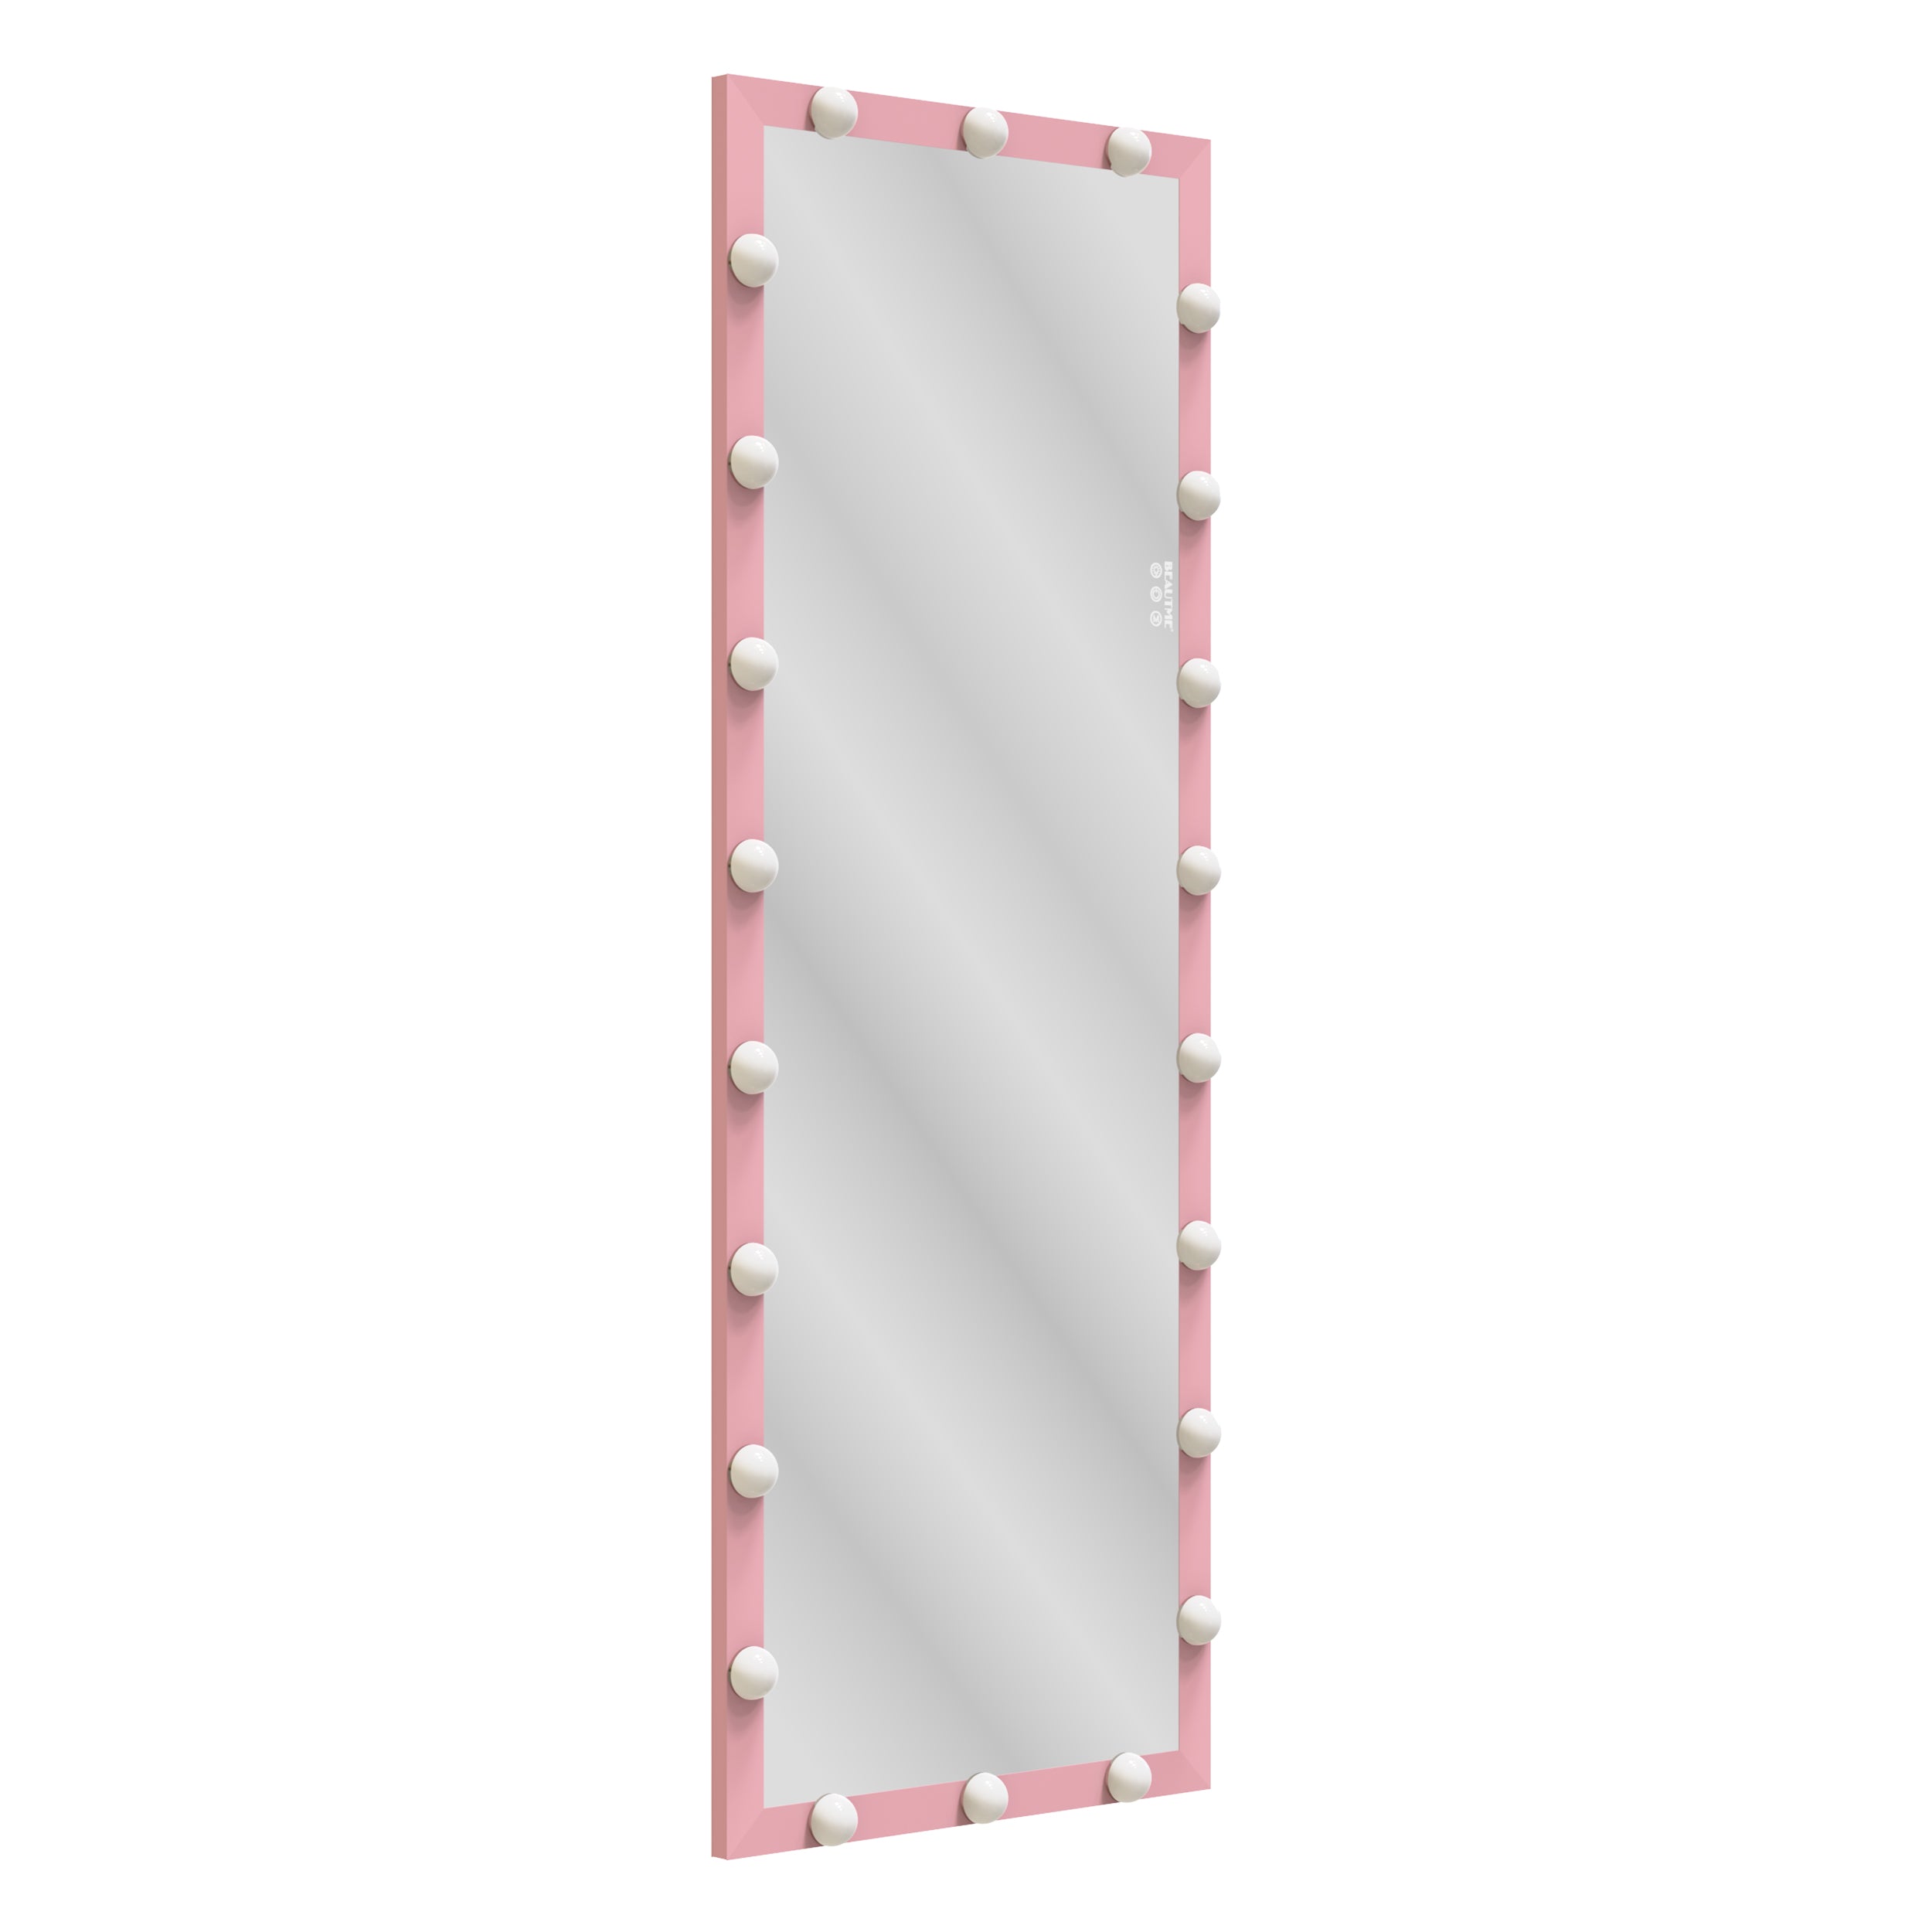 Hollywood Full Length Mirror with Lights Full Body Vanity Mirror with 3 Color Modes Wall Lighted Standing Floor Mirror for Dressing Room Bedroom Hotel Touch Control Pink 62.6"x23.3"